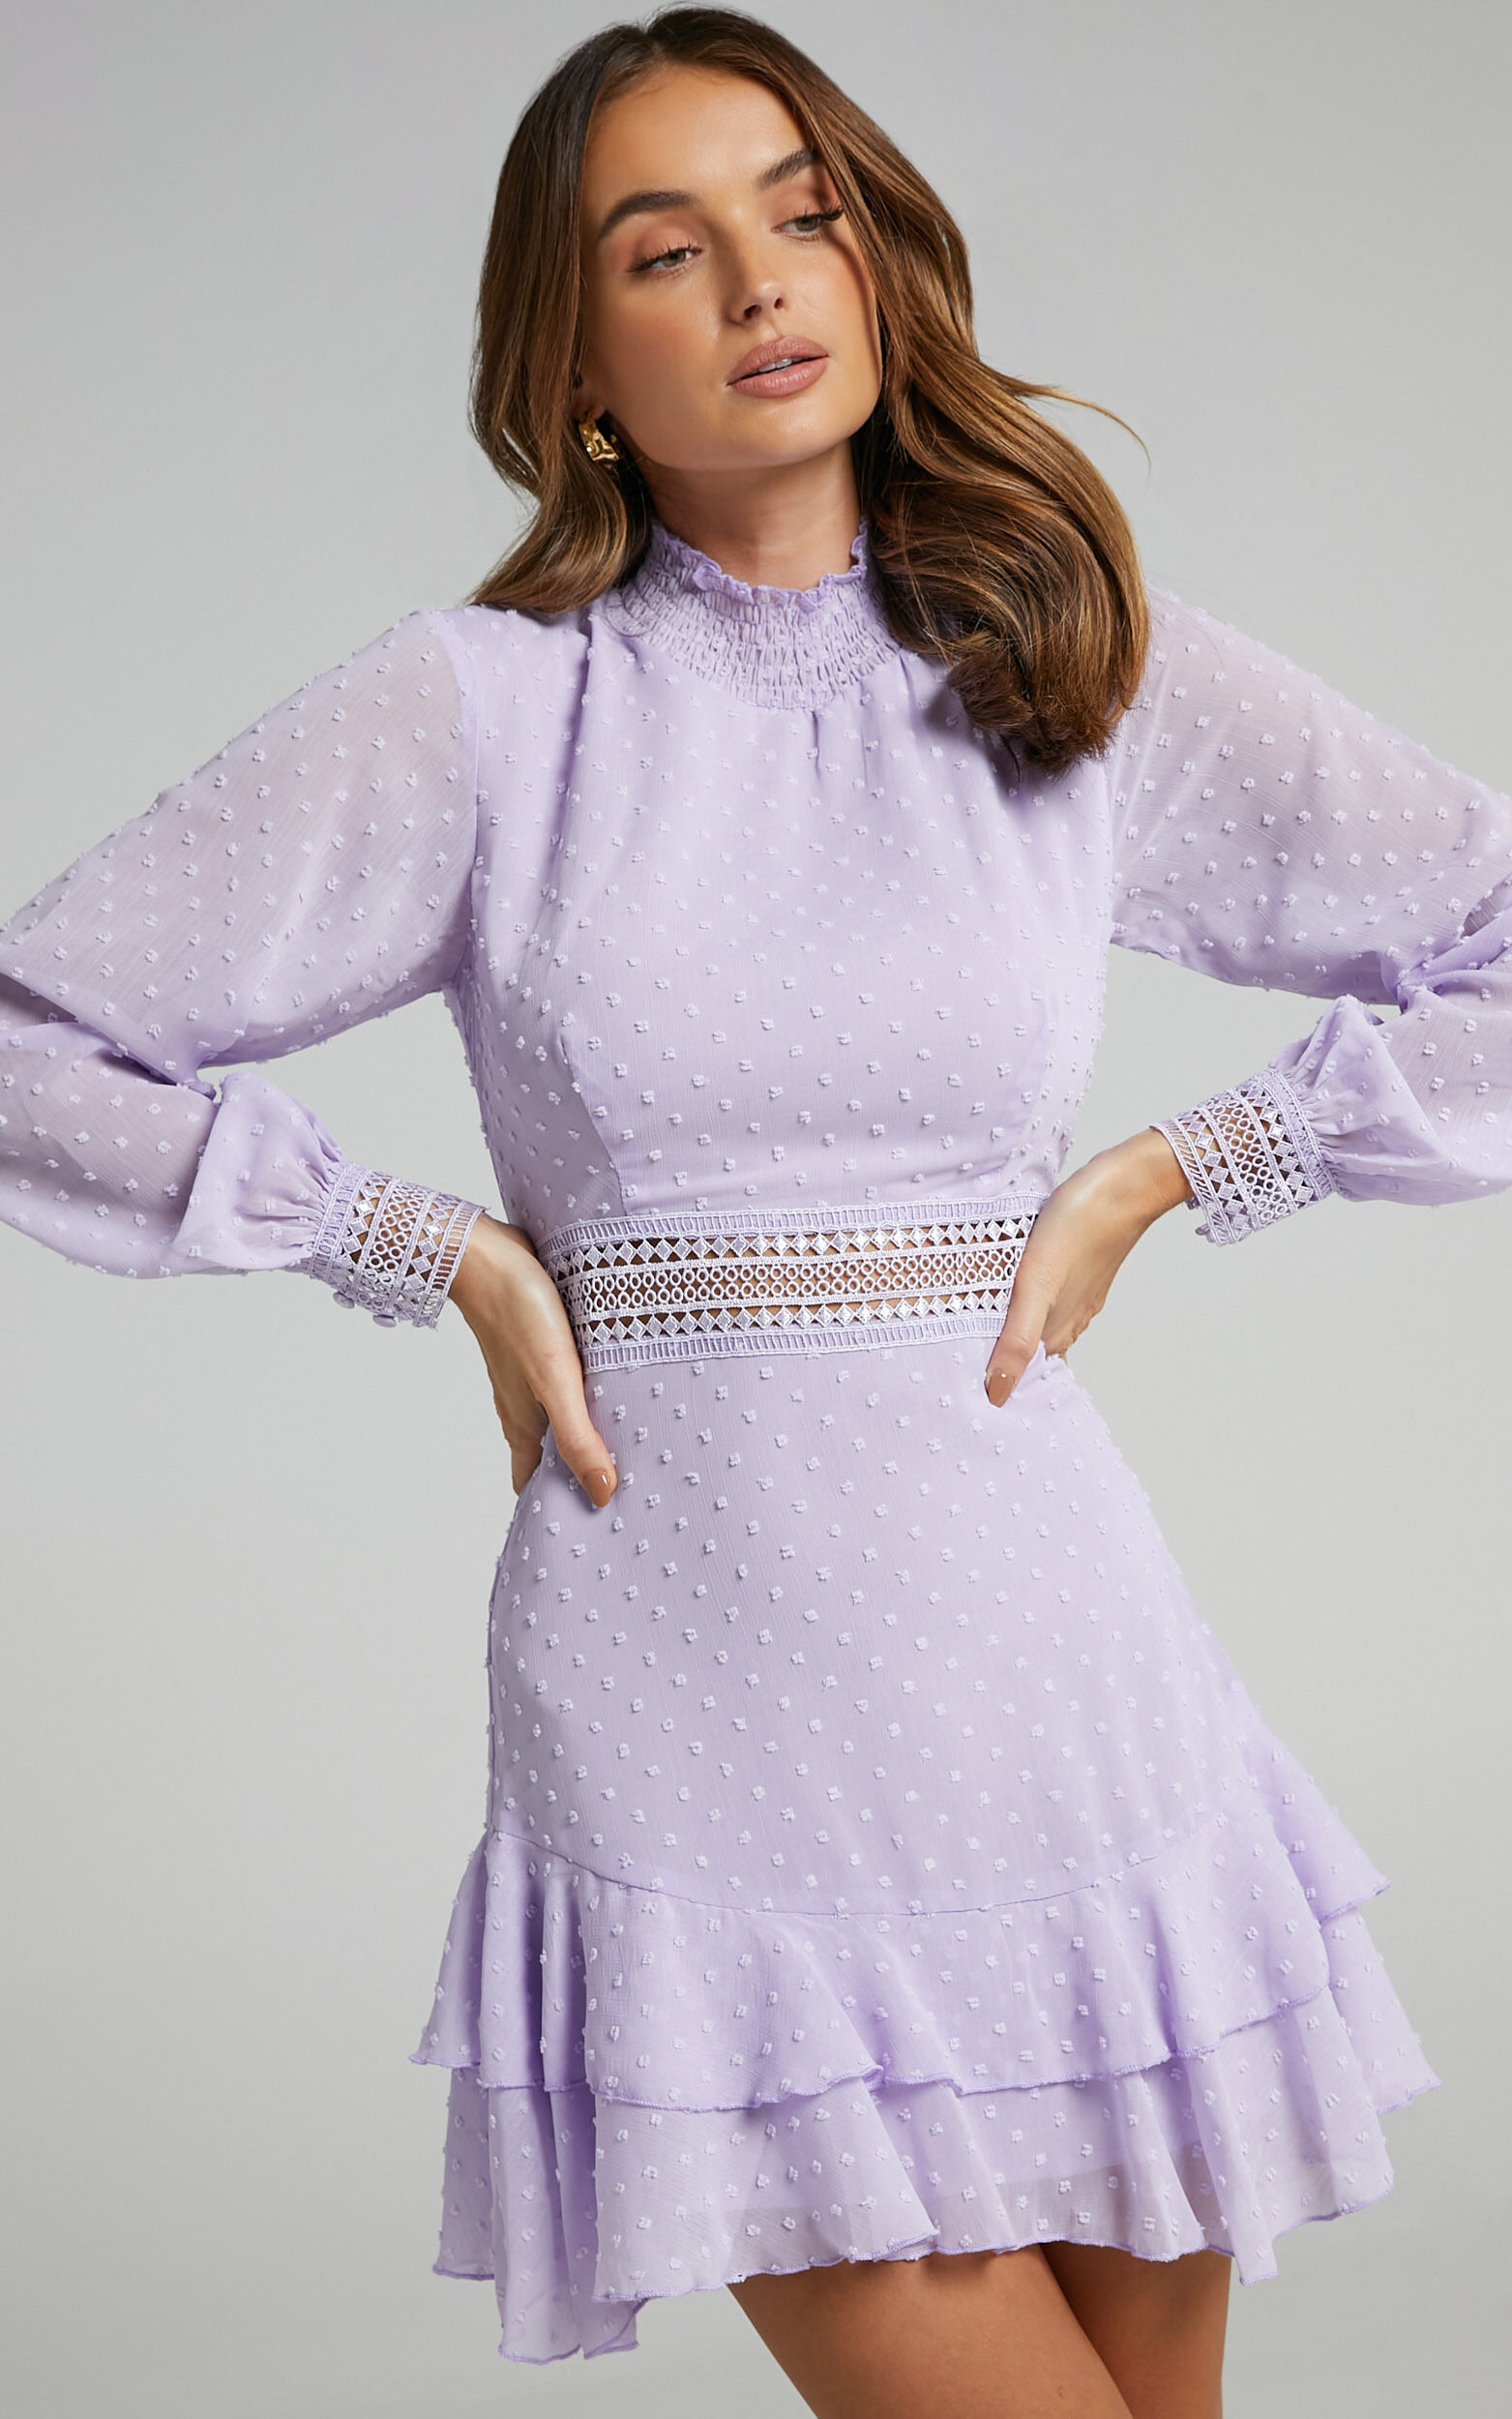 Are You Gonna Kiss Me Long Sleeve Mini Dress in Lilac - 04, PRP3